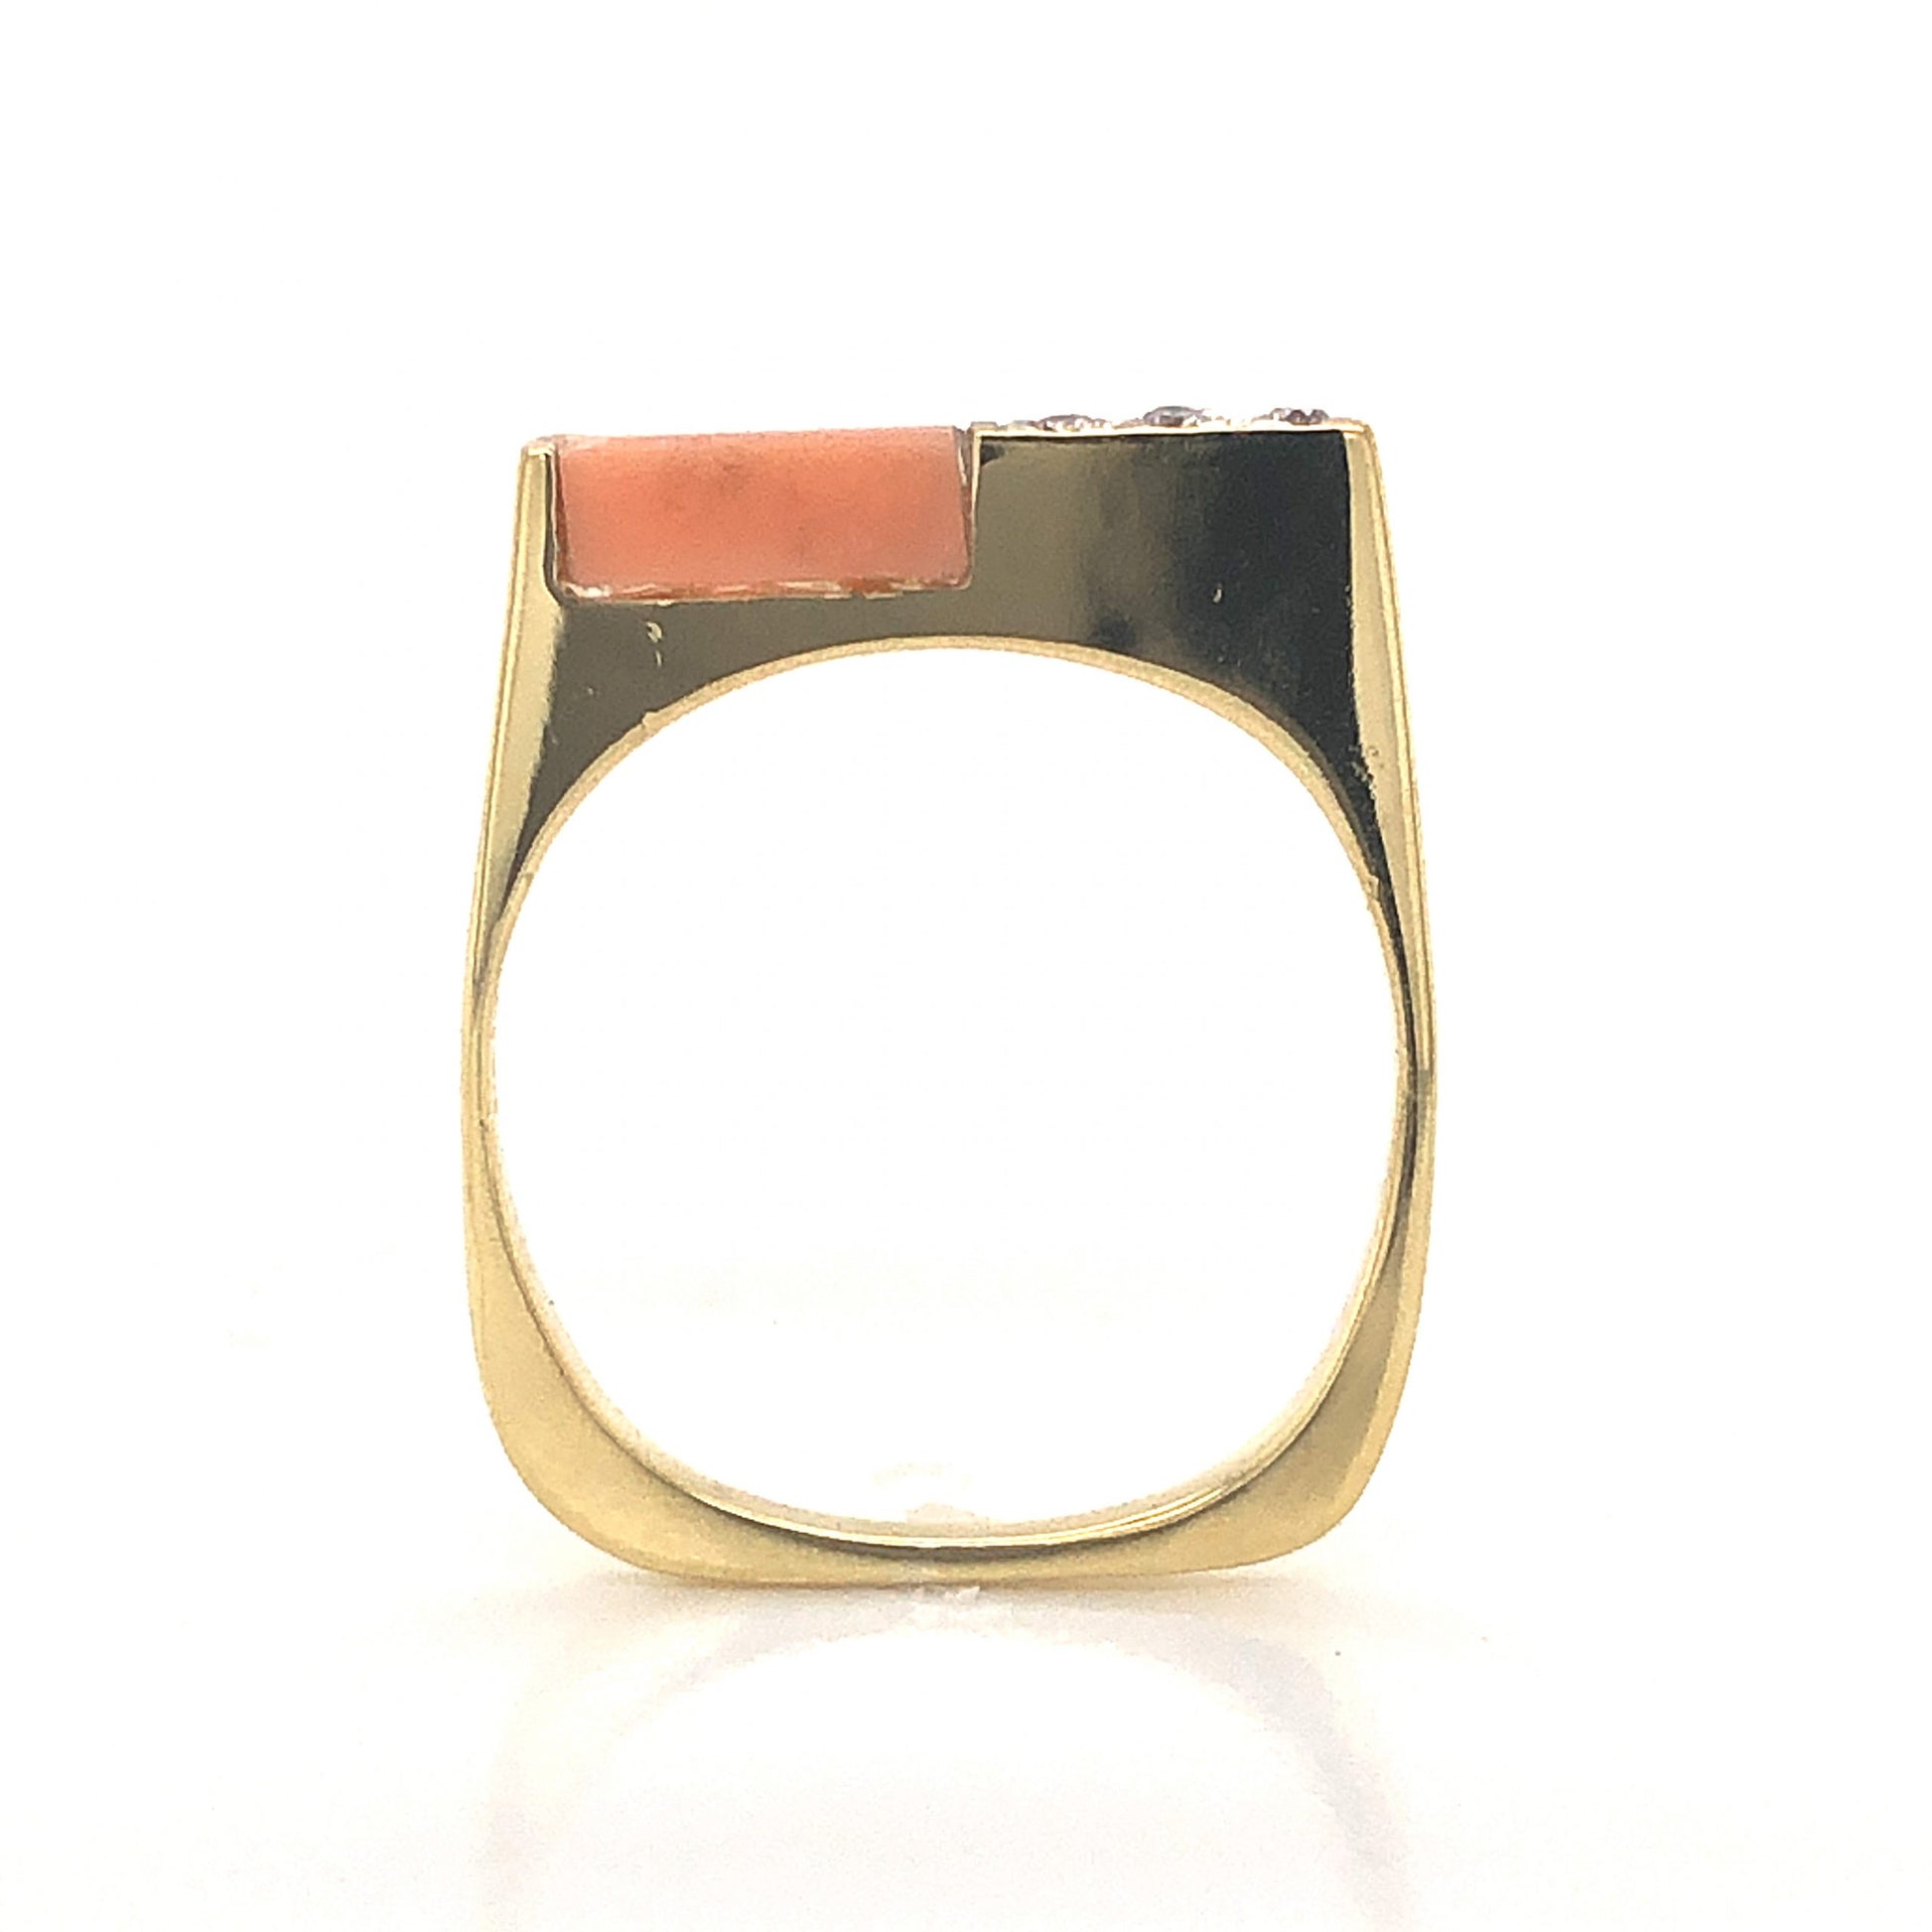 Mid-Century Thin Coral & Diamond Ring in 18k Yellow GoldComposition: PlatinumRing Size: 6Total Diamond Weight: .045 ctTotal Gram Weight: 2.7 gInscription: 18k 